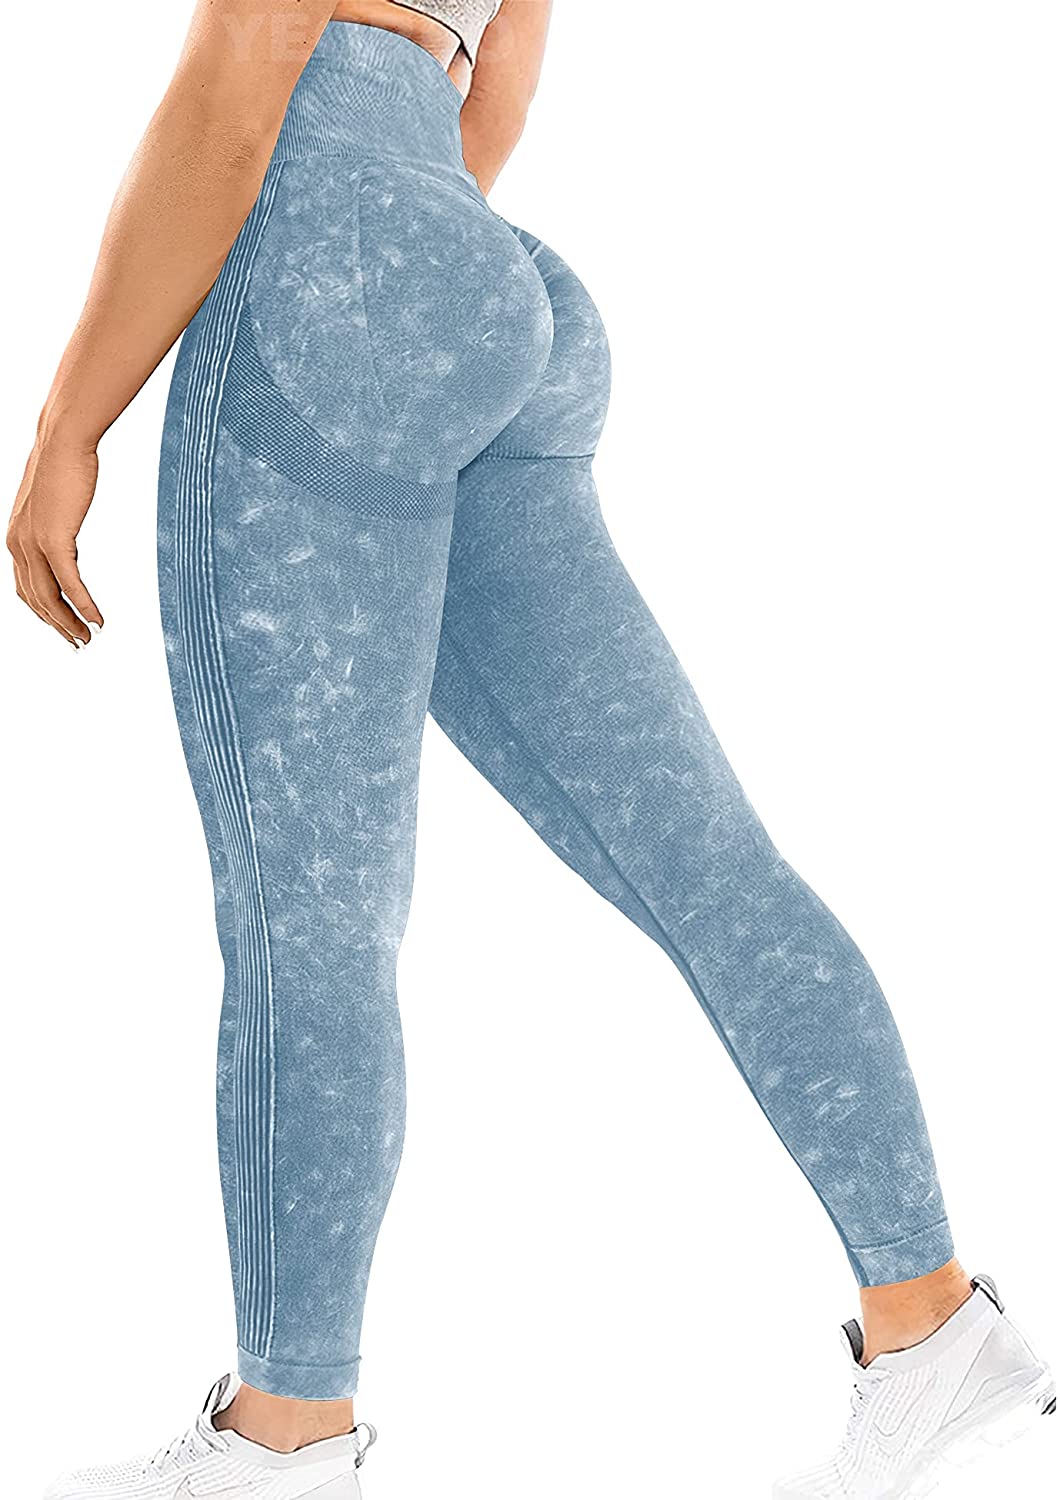 YEOREO Scrunch Butt Lift Leggings for Women Workout Yoga Pants Ruched Booty  High Waist Seamless Leggings Compression Tights, #0 Tie Dye Dark Blue